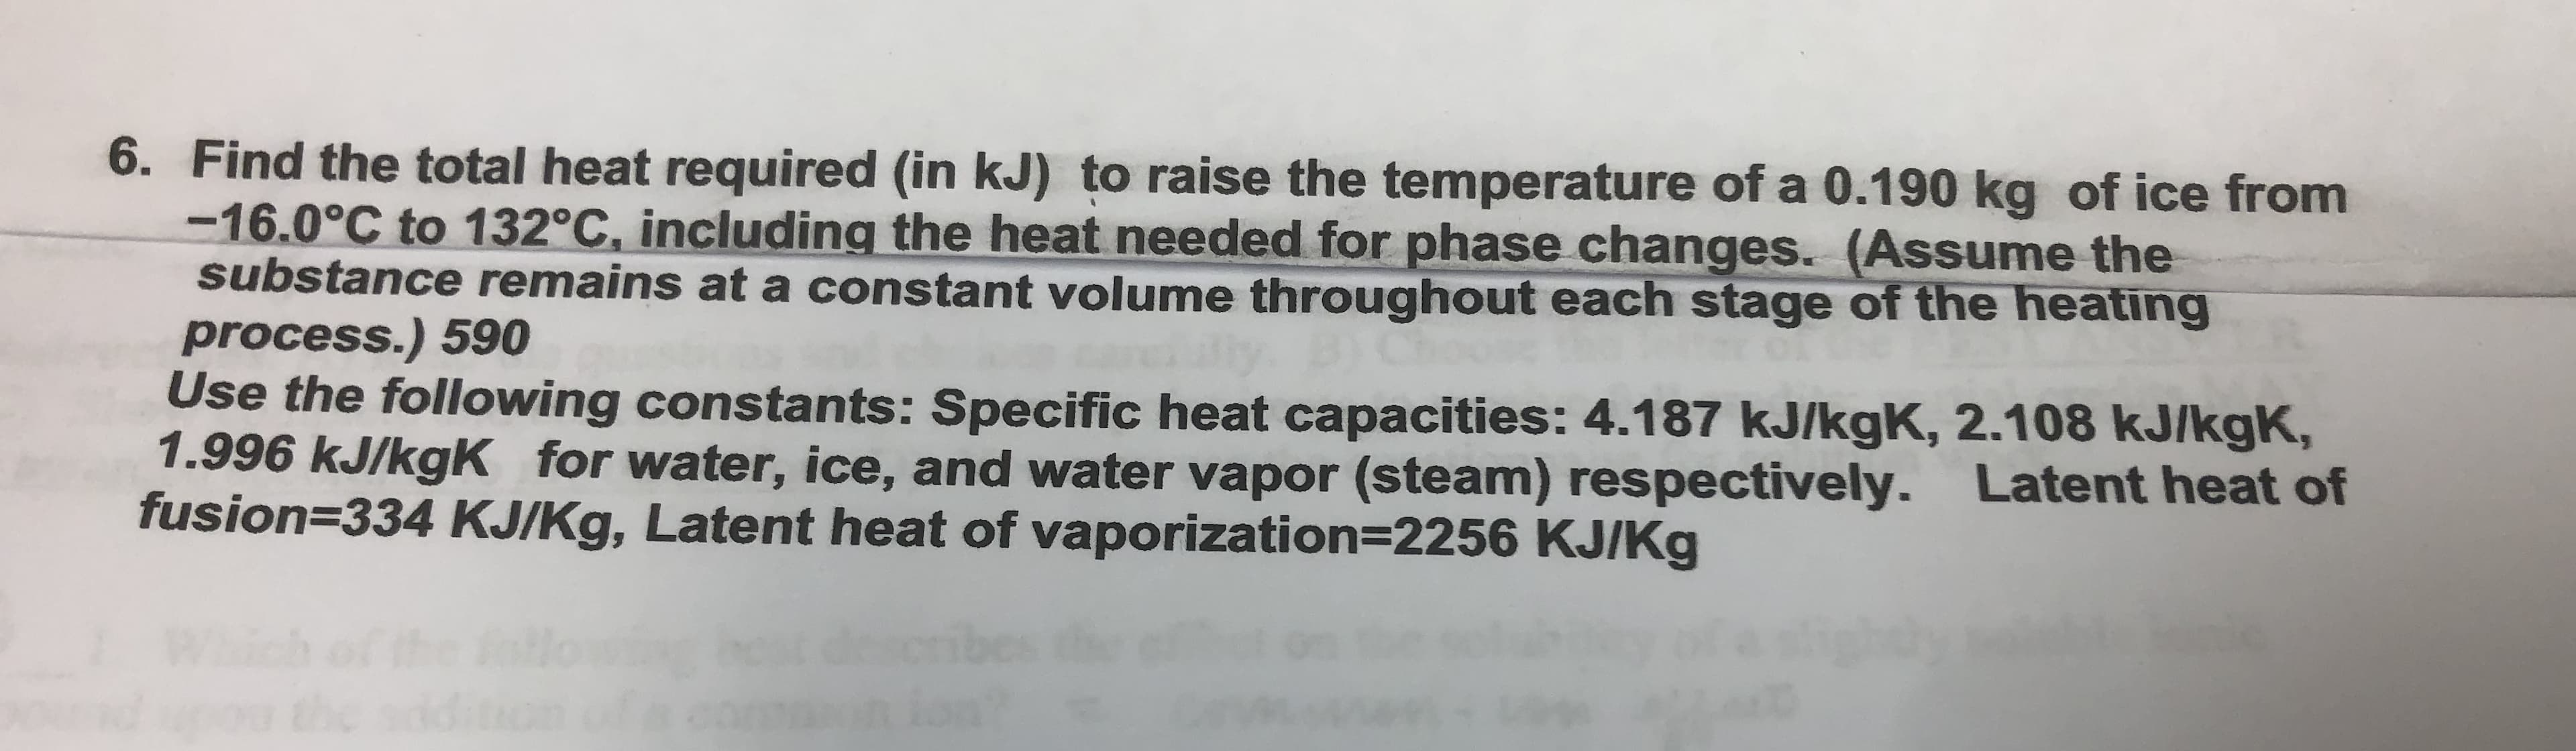 6. Find the total heat required (in kJ) to raise the temperature of a 0.190 kg of ice from
-16.0°C to 132°C, including the heat needed for phase changes. (Assume the
substance remains at a constant volume throughout each stage of the heating
process.) 590
Use the following constants: Specific heat capacities: 4.187 kJ/kgK, 2.108 kJ/kgK,
1.996 kJ/kgK for water, ice, and water vapor (steam) respectively. Latent heat of
fusion=334 KJ/Kg, Latent heat of vaporization=2256 KJ/Kg
%3D
B)Cho
